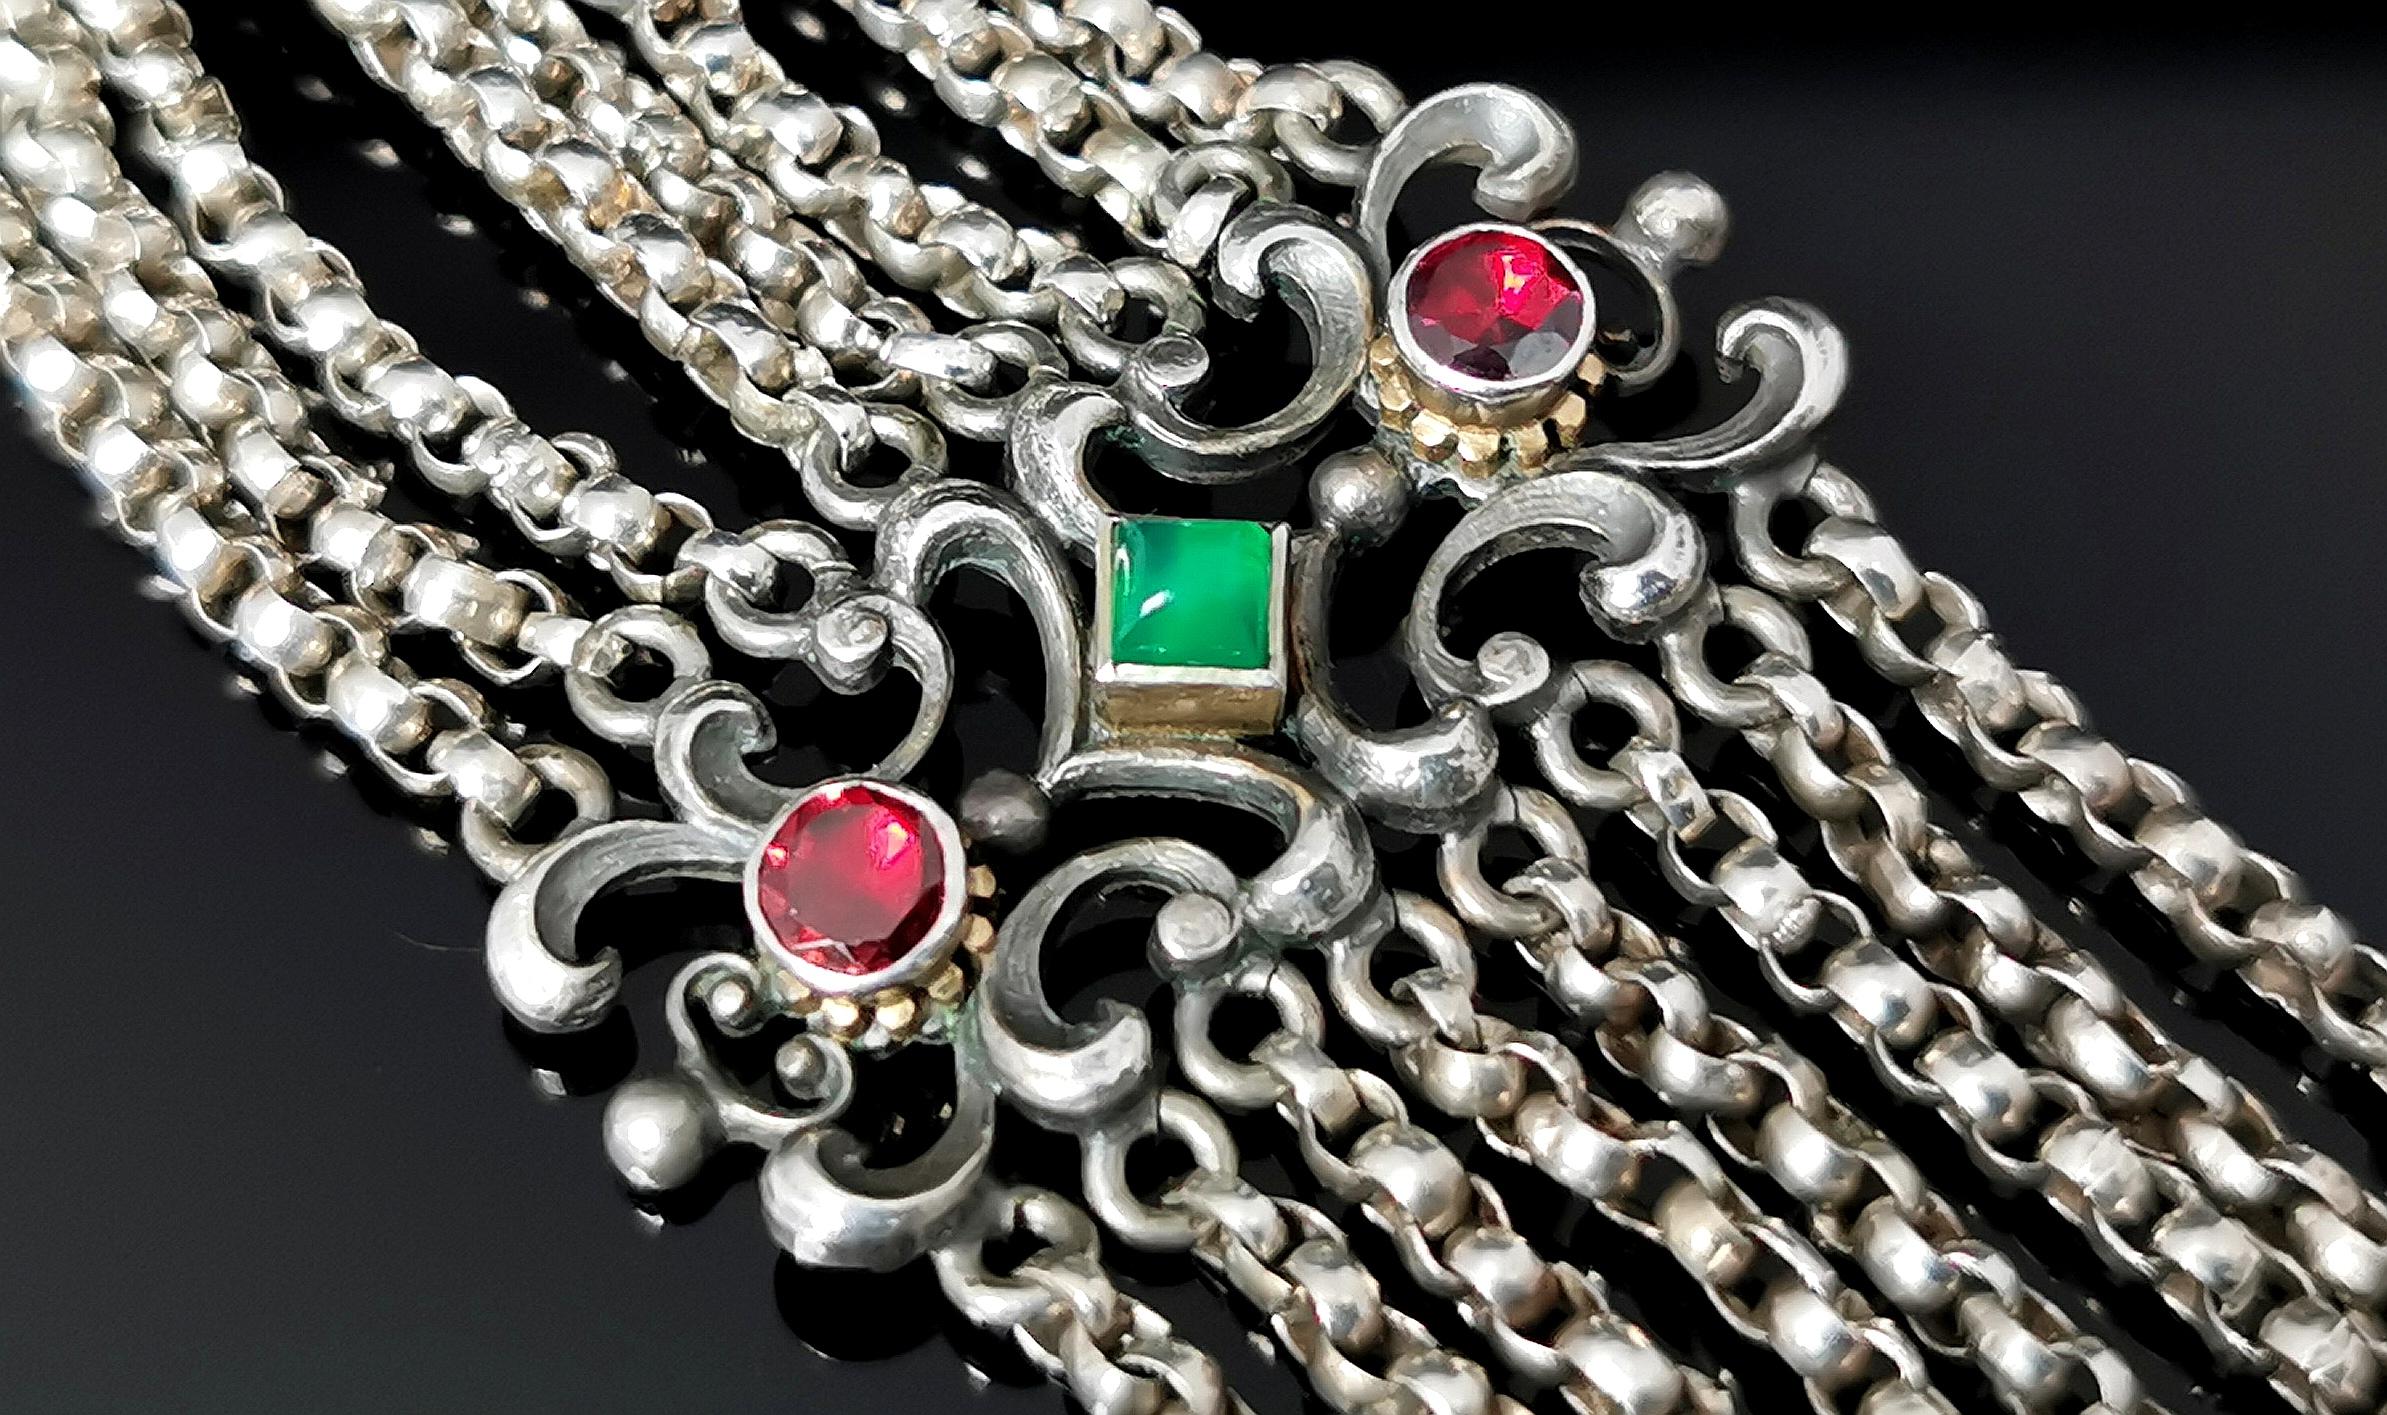 Victorian Antique Austro Hungarian bracelet, Garnet and Chalcedony, 800 Silver